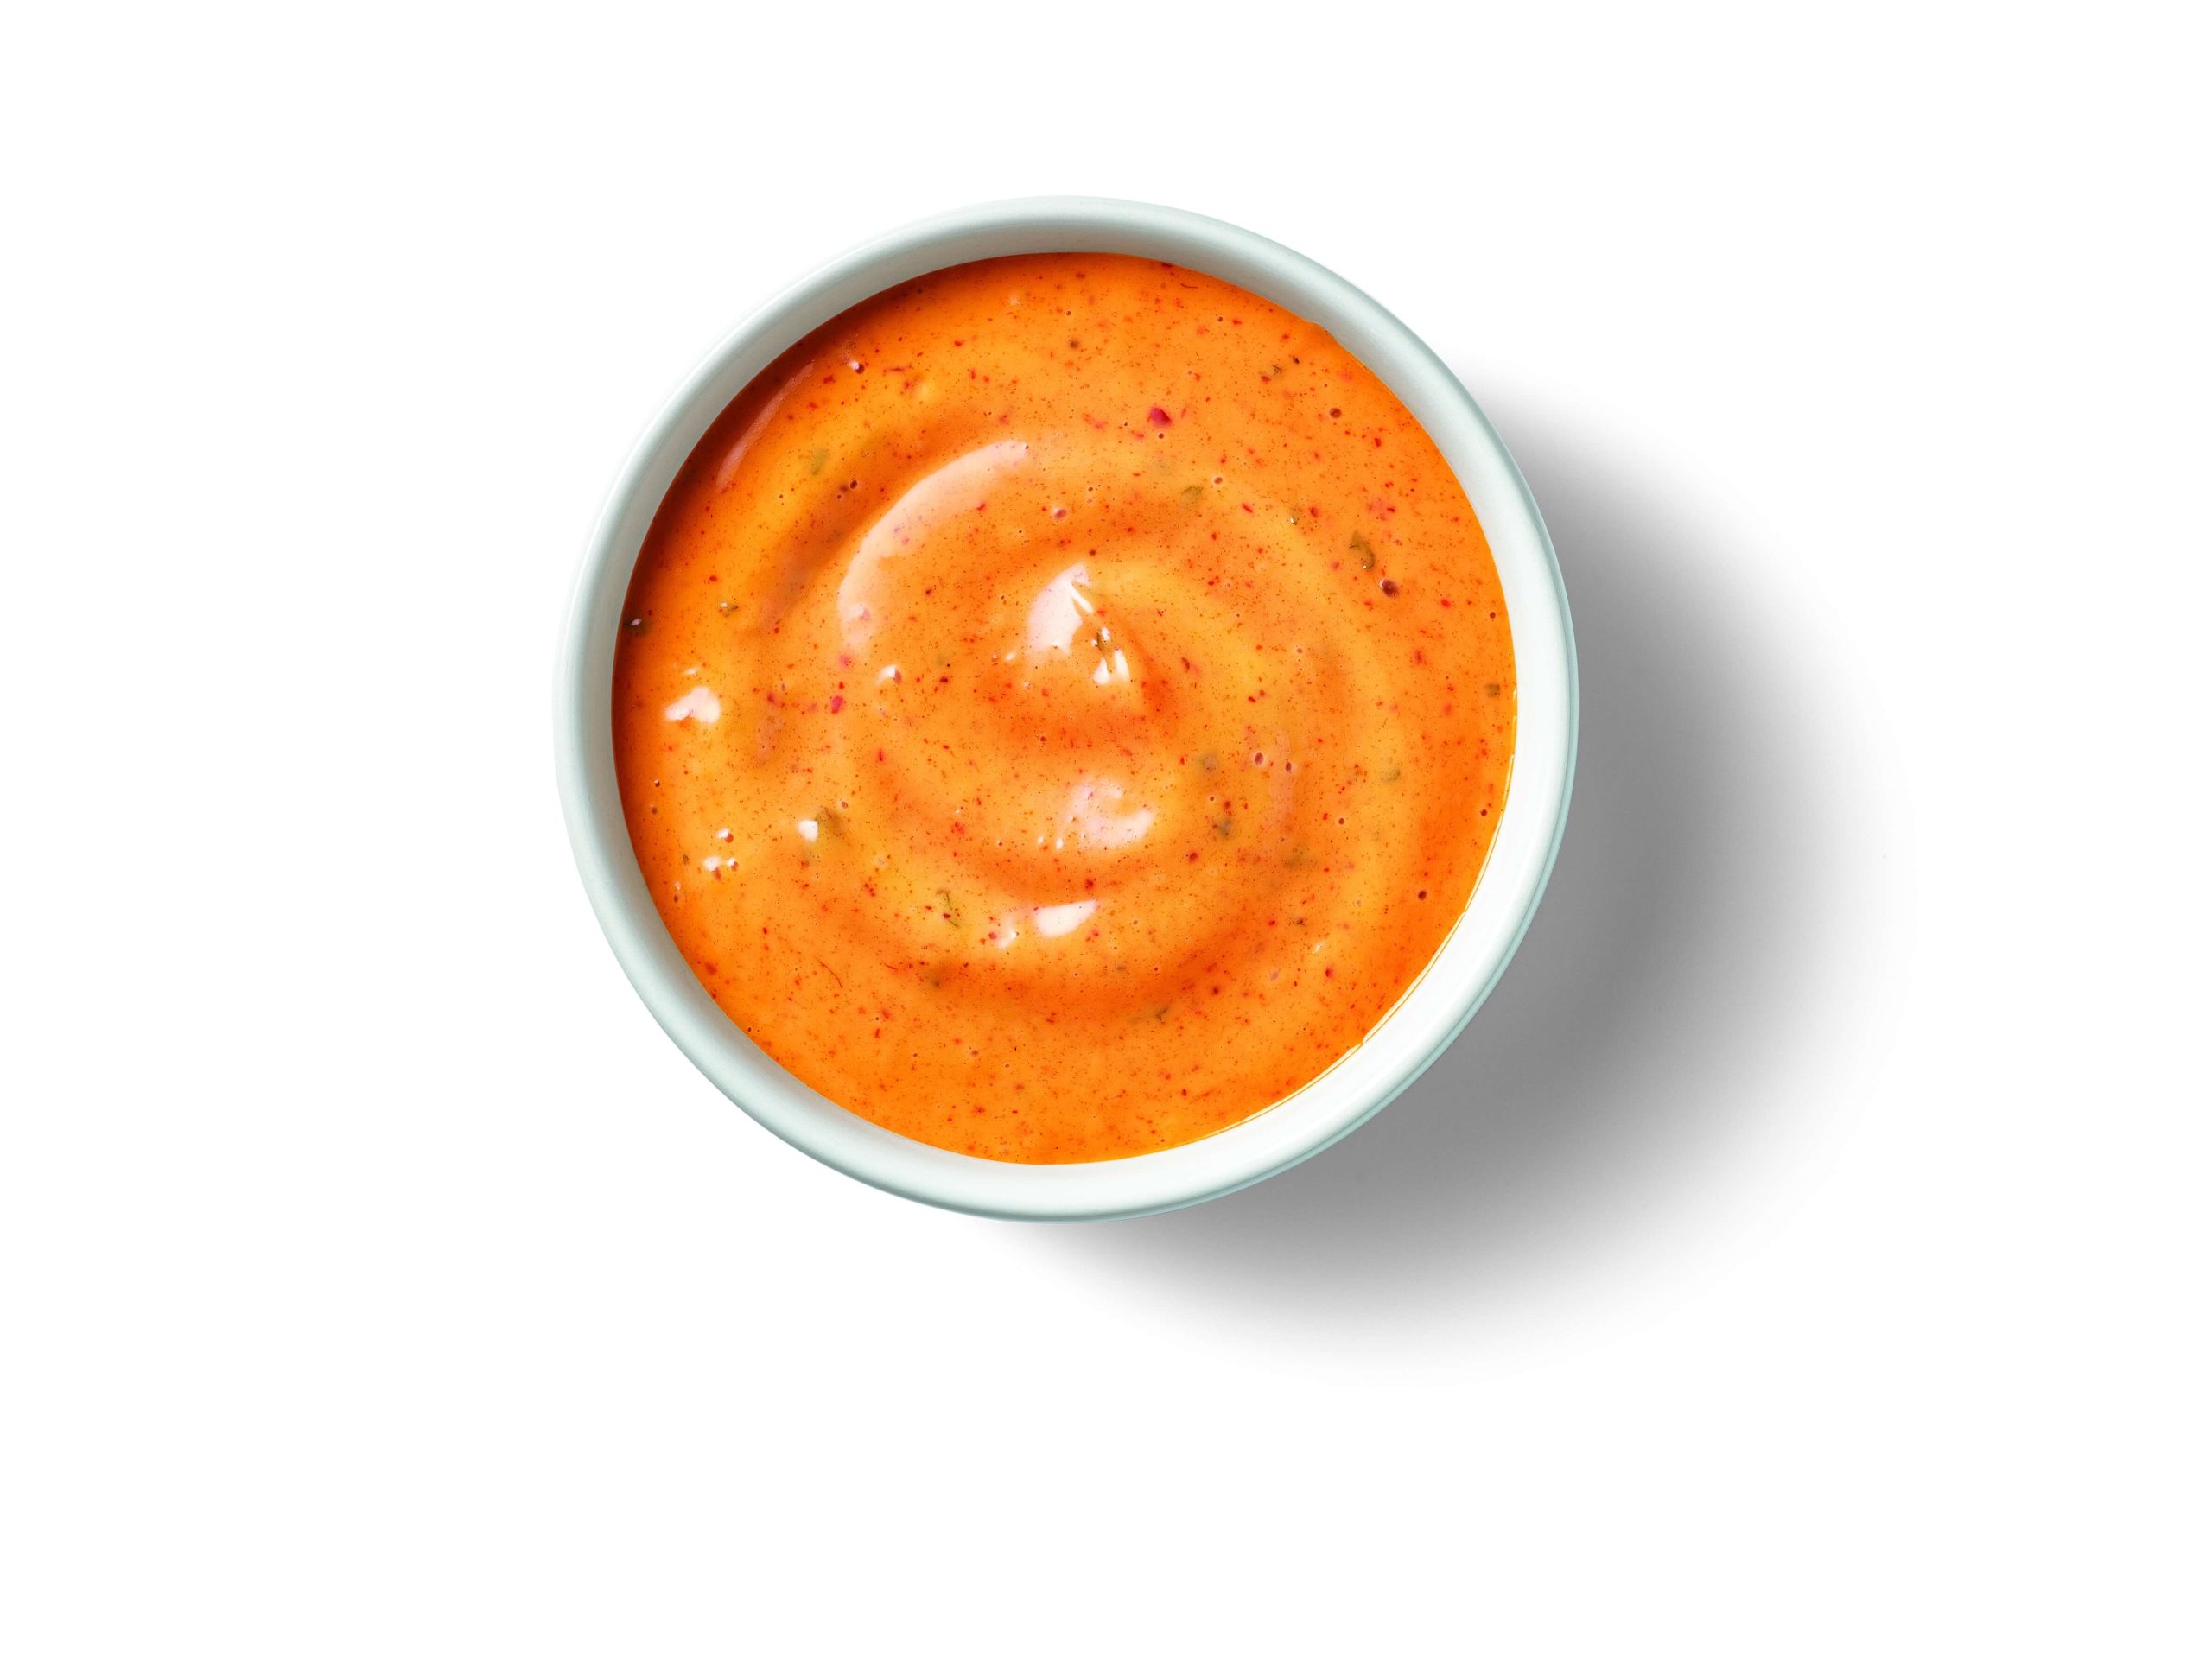 Image of Baja Chipotle Sauce in a small white sauce dish